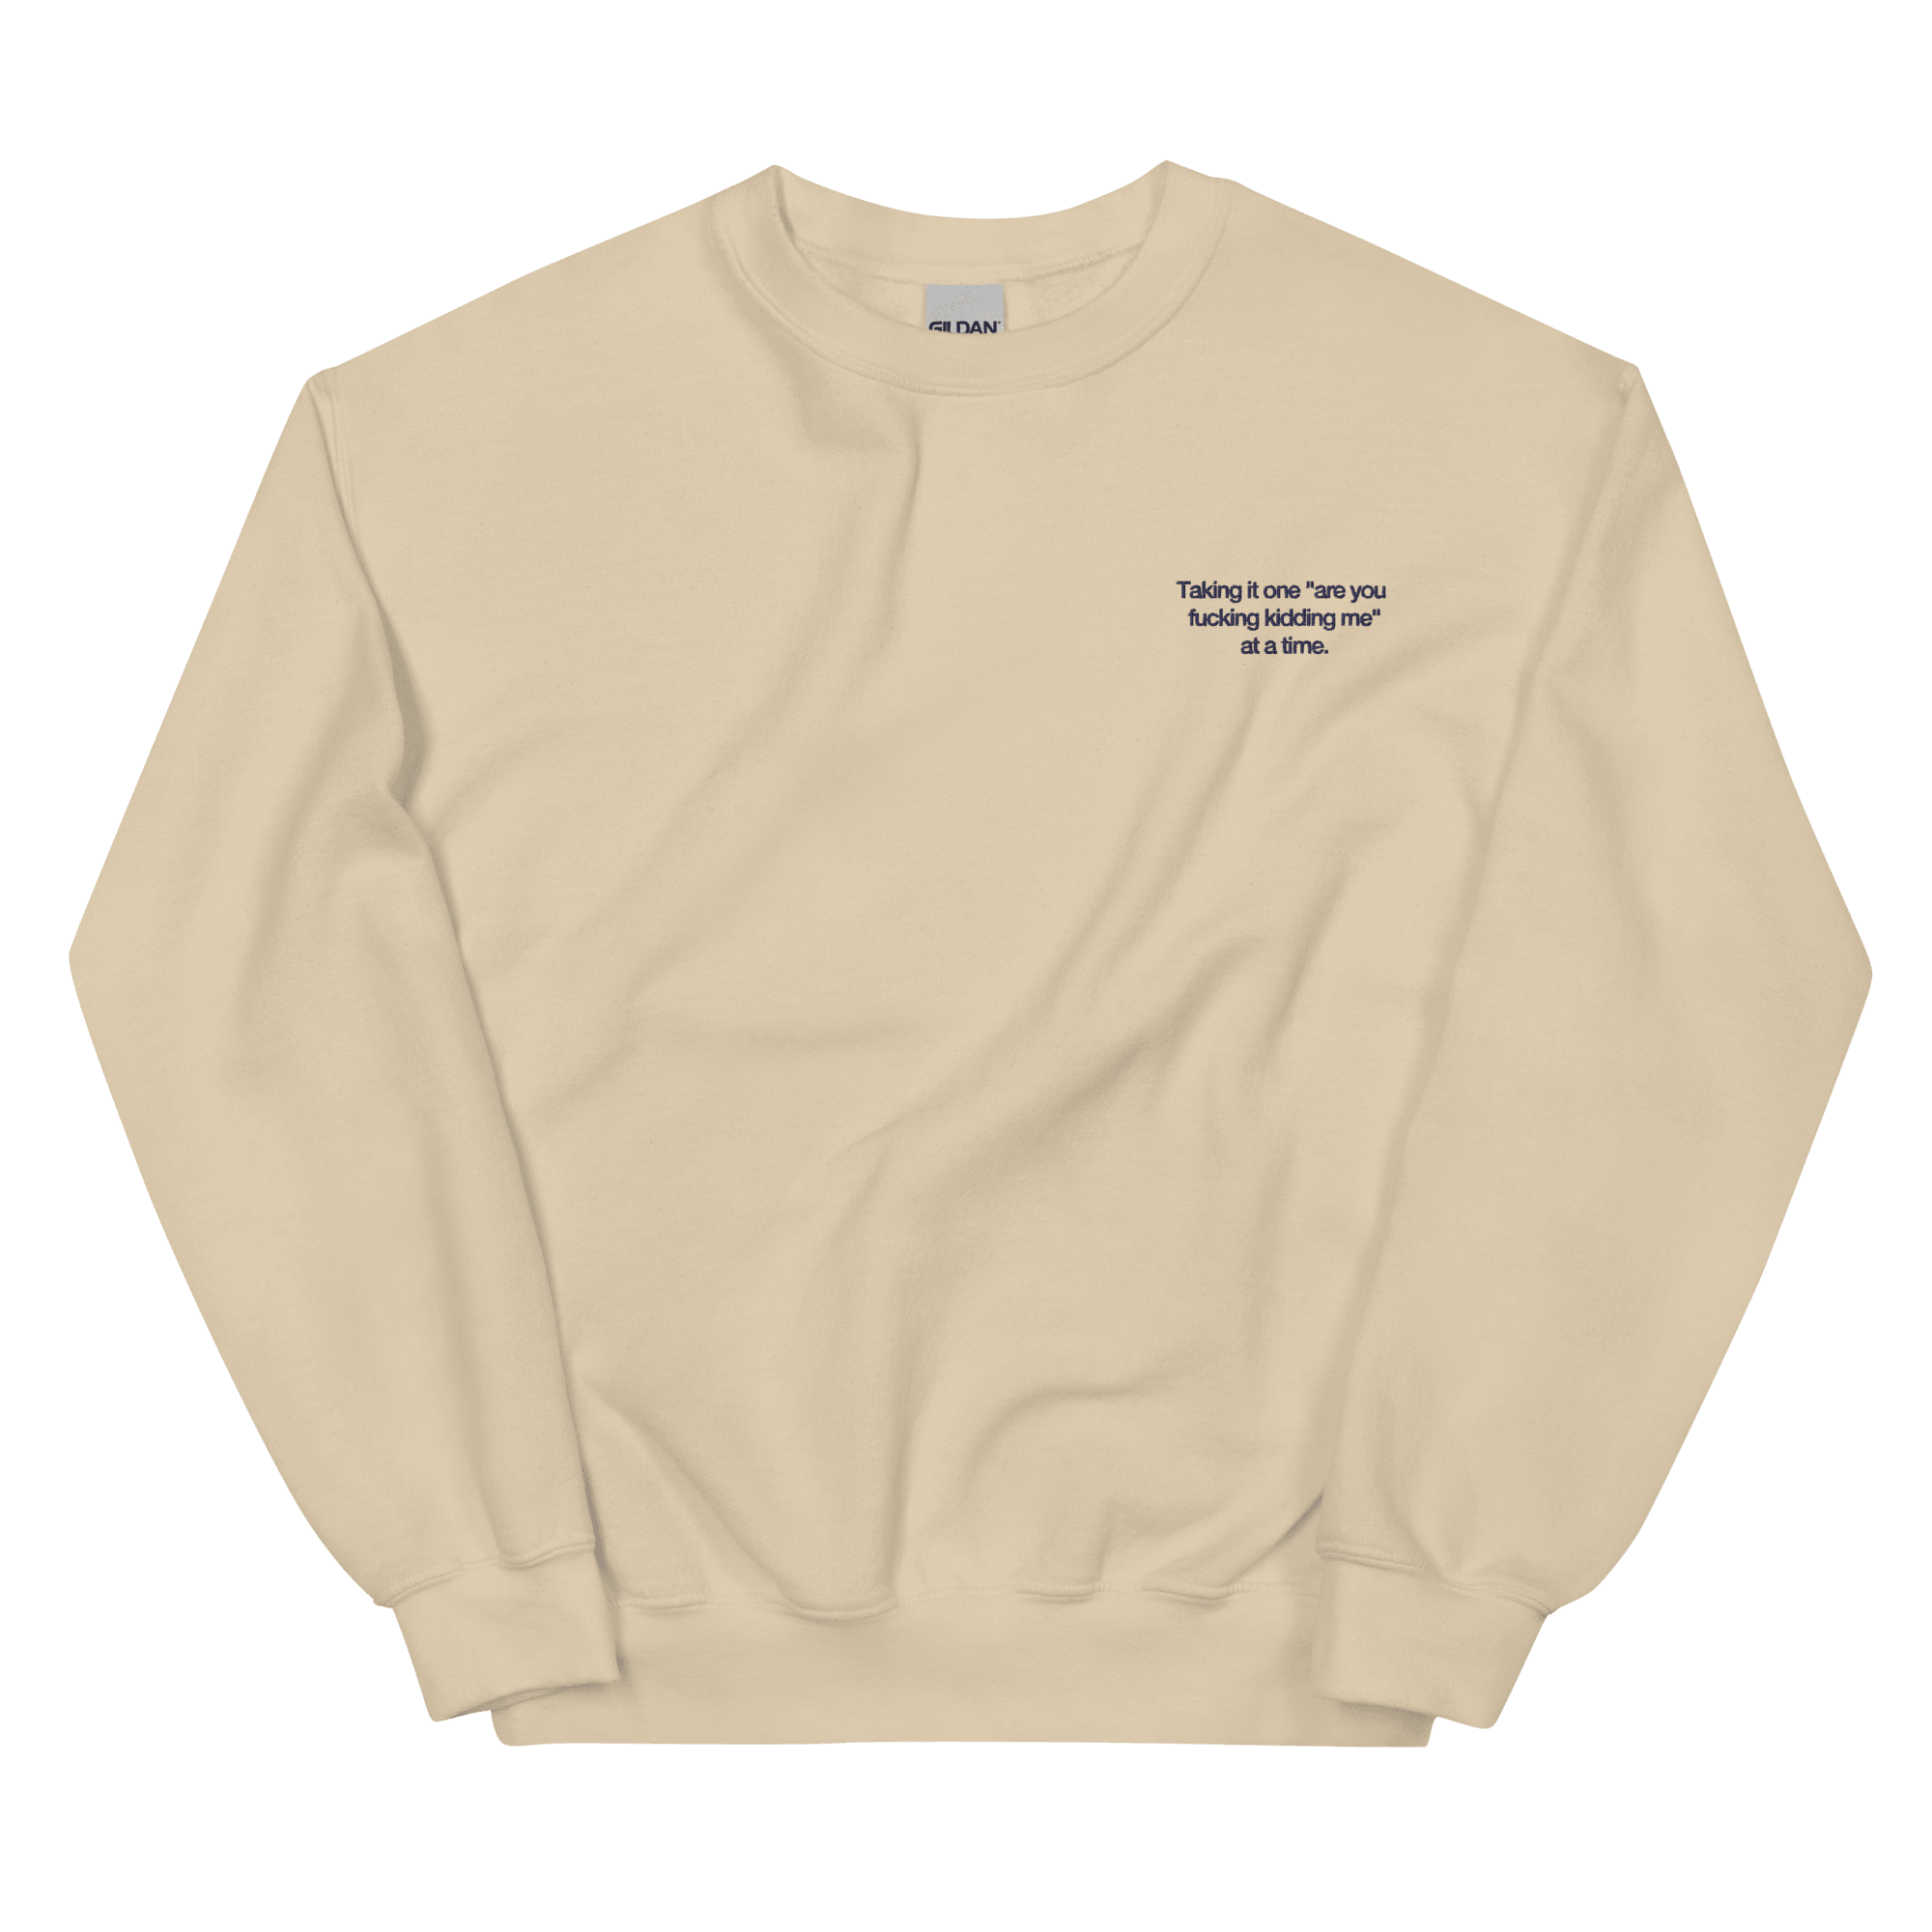 Taking it one "are you fucking kidding me" at a time Sweatshirt - Polychrome Goods 🍊